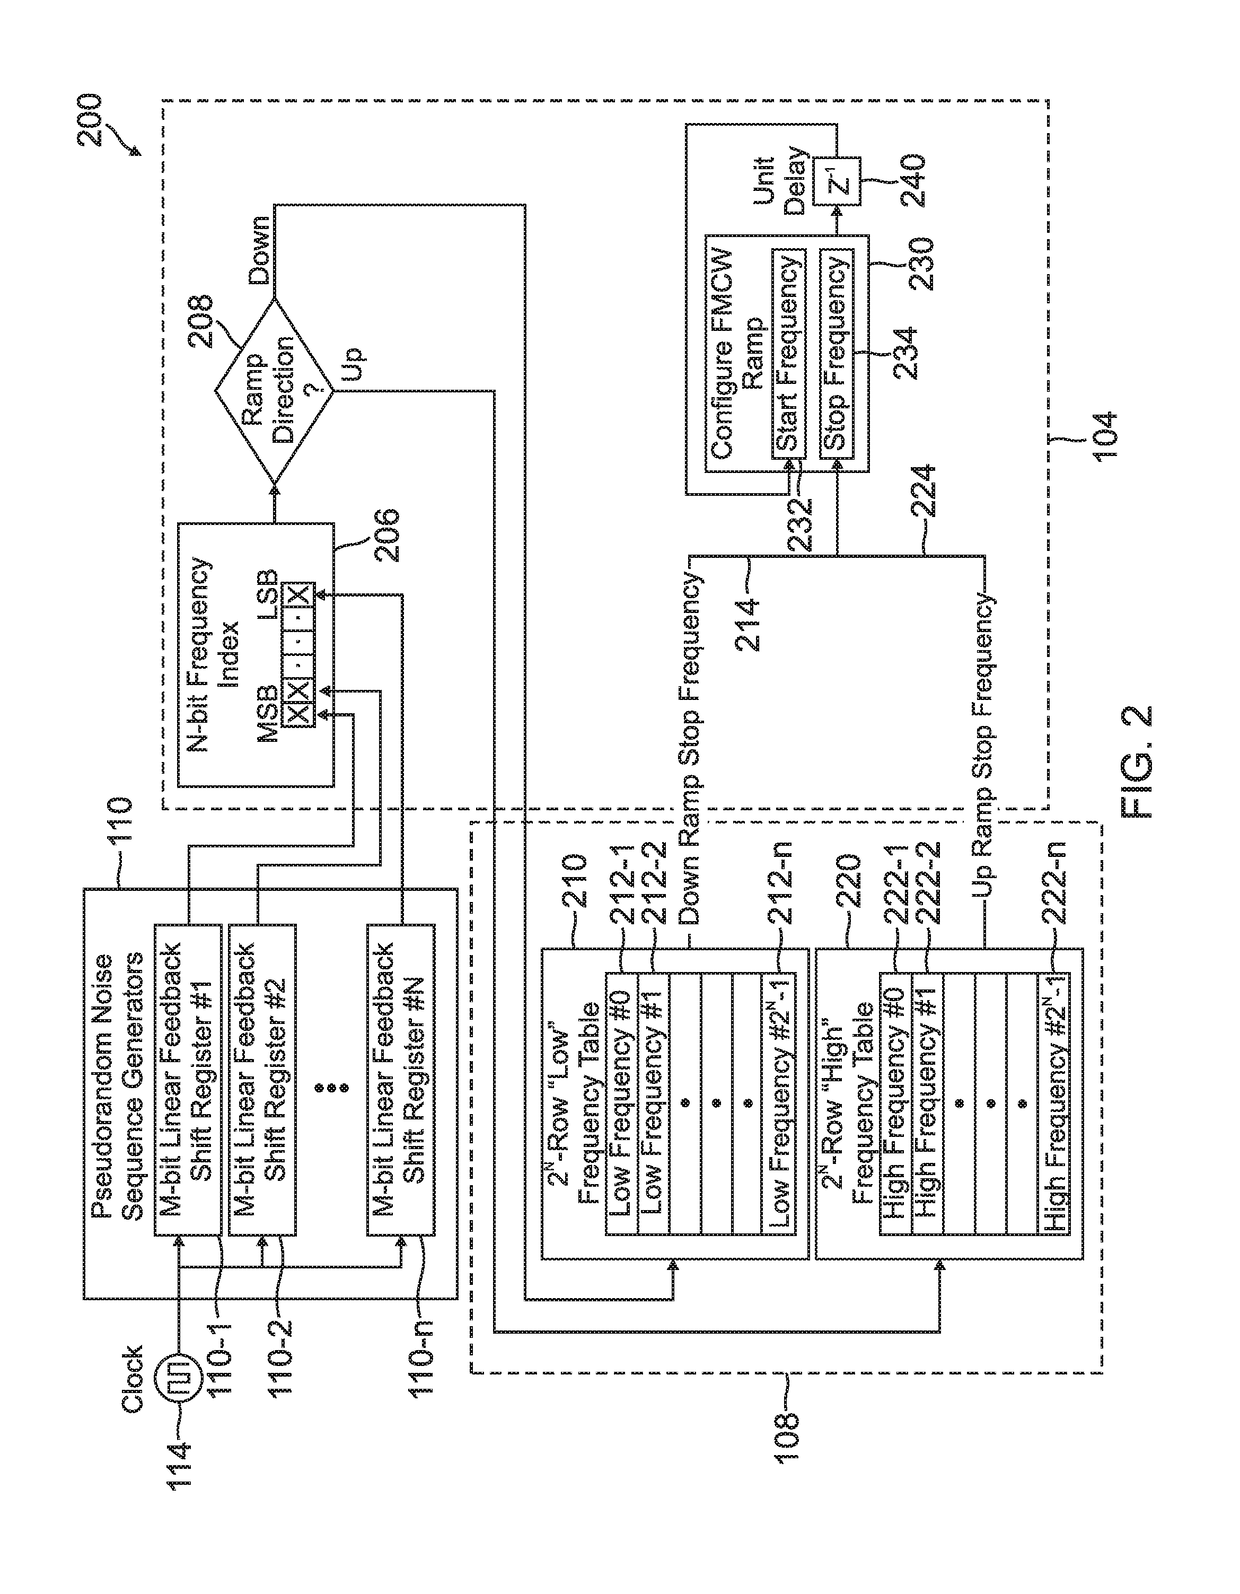 Signal interference prevention system for a frequency-modulated continuous wave radar altimeter